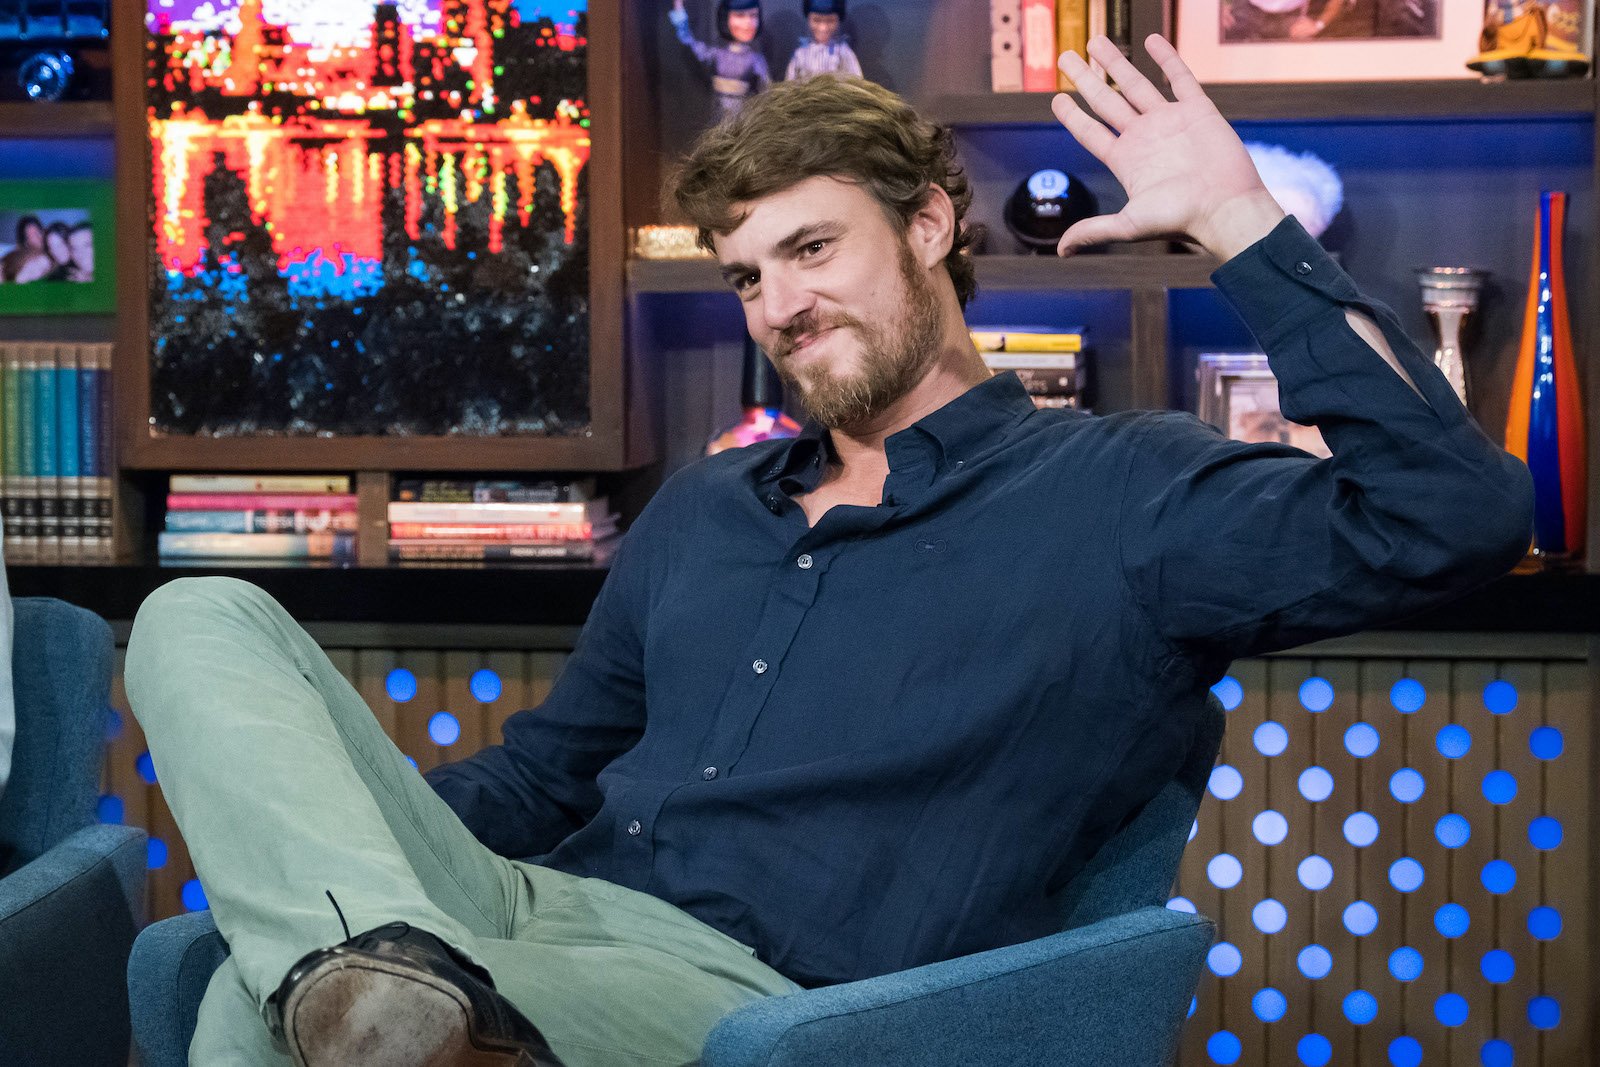 Shep Rose from Southern Charm appeared on WWHL